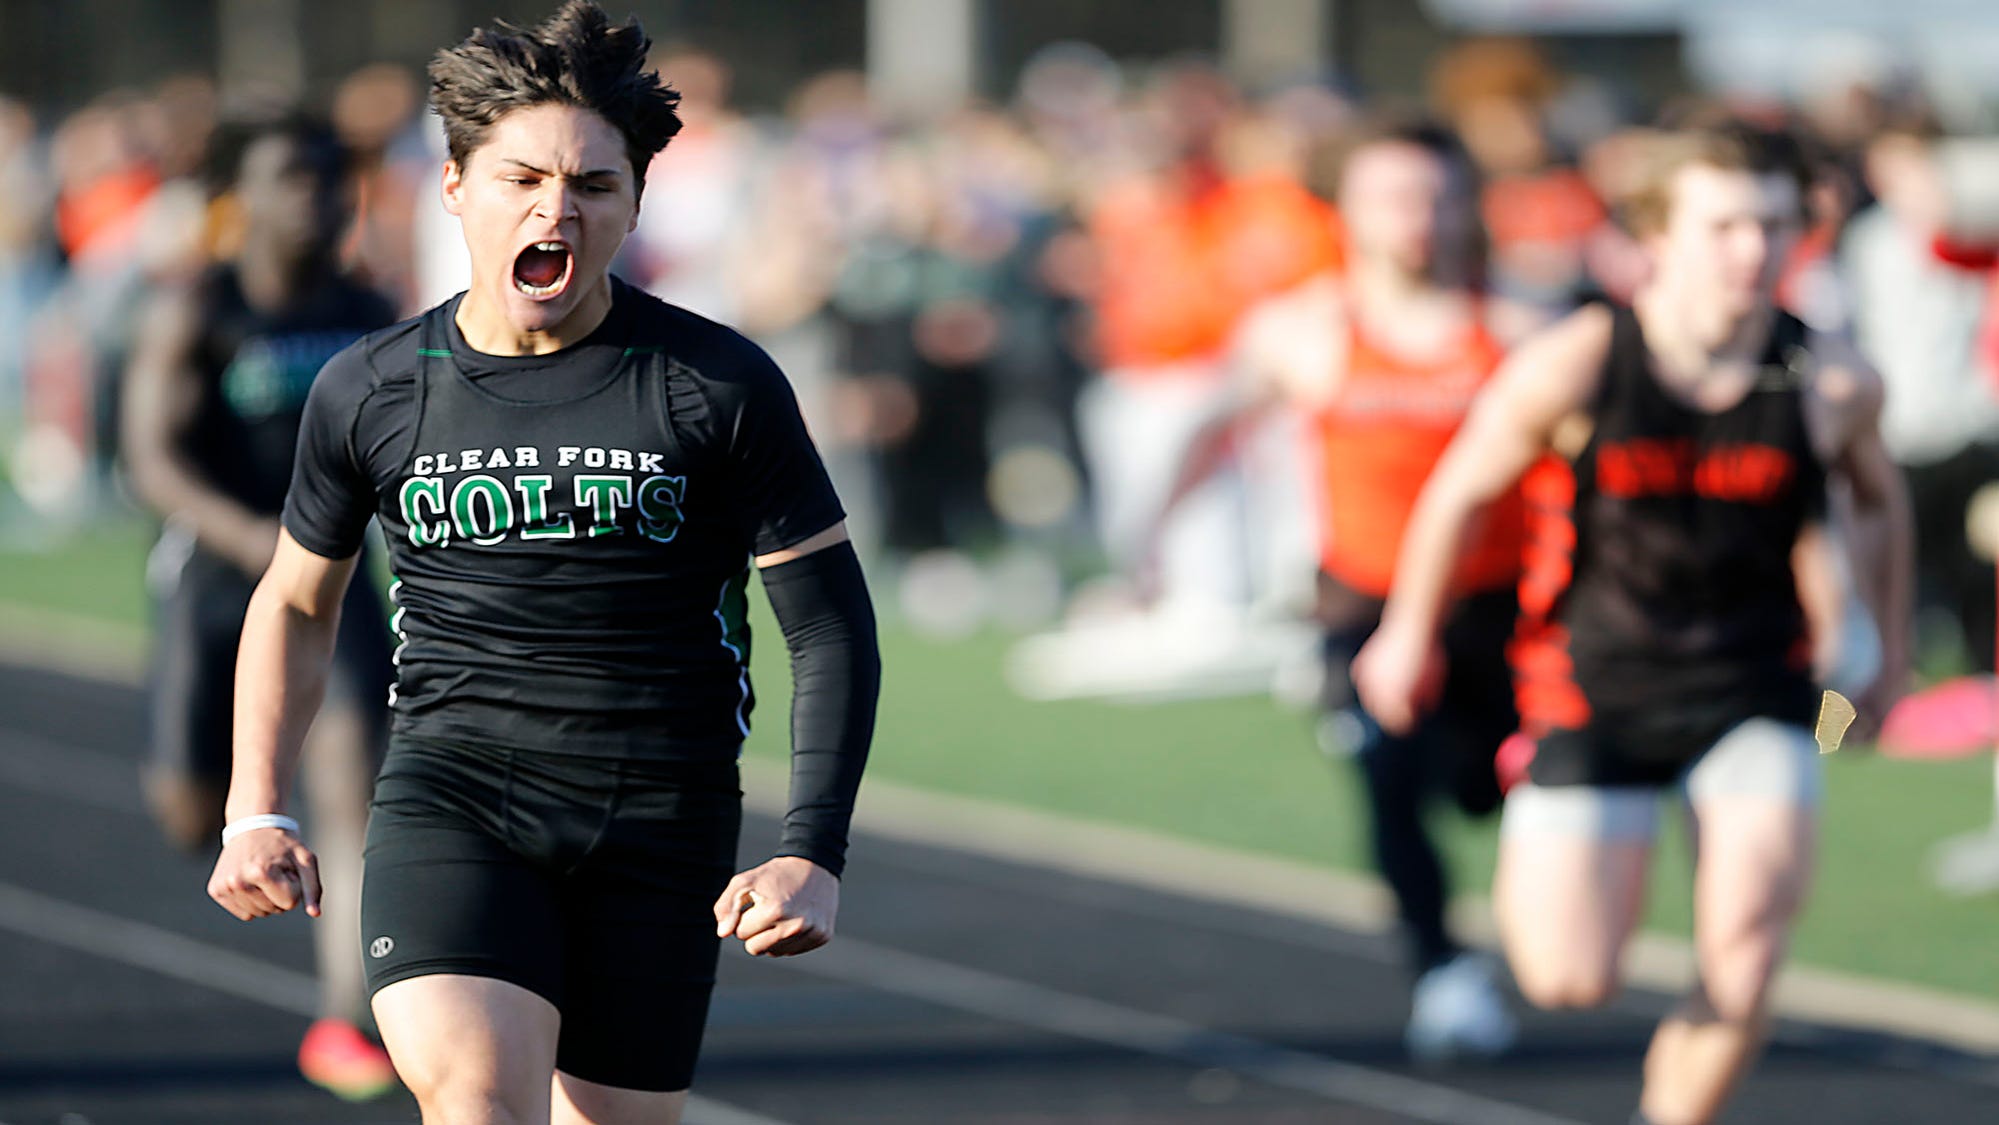 3 races, 3 wins, 3 records: Clear Fork's Stupka sizzles on 'familiar' track  - BVM Sports